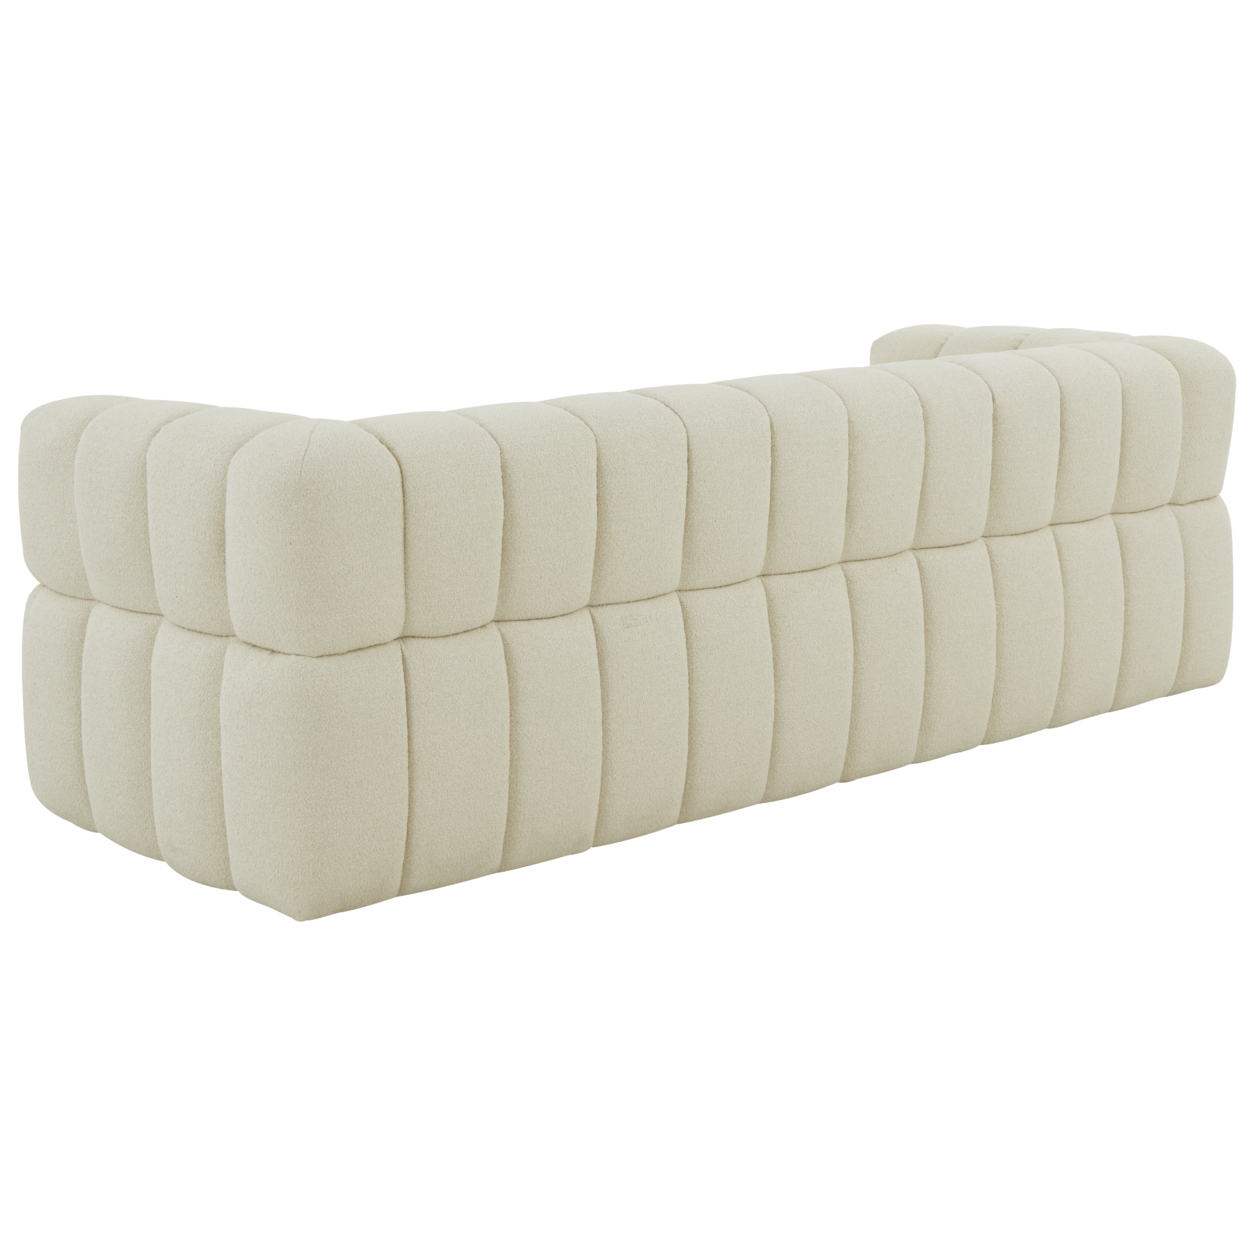 SAFAVIEH COUTURE Calyna Channel Tufted Sofa Creme